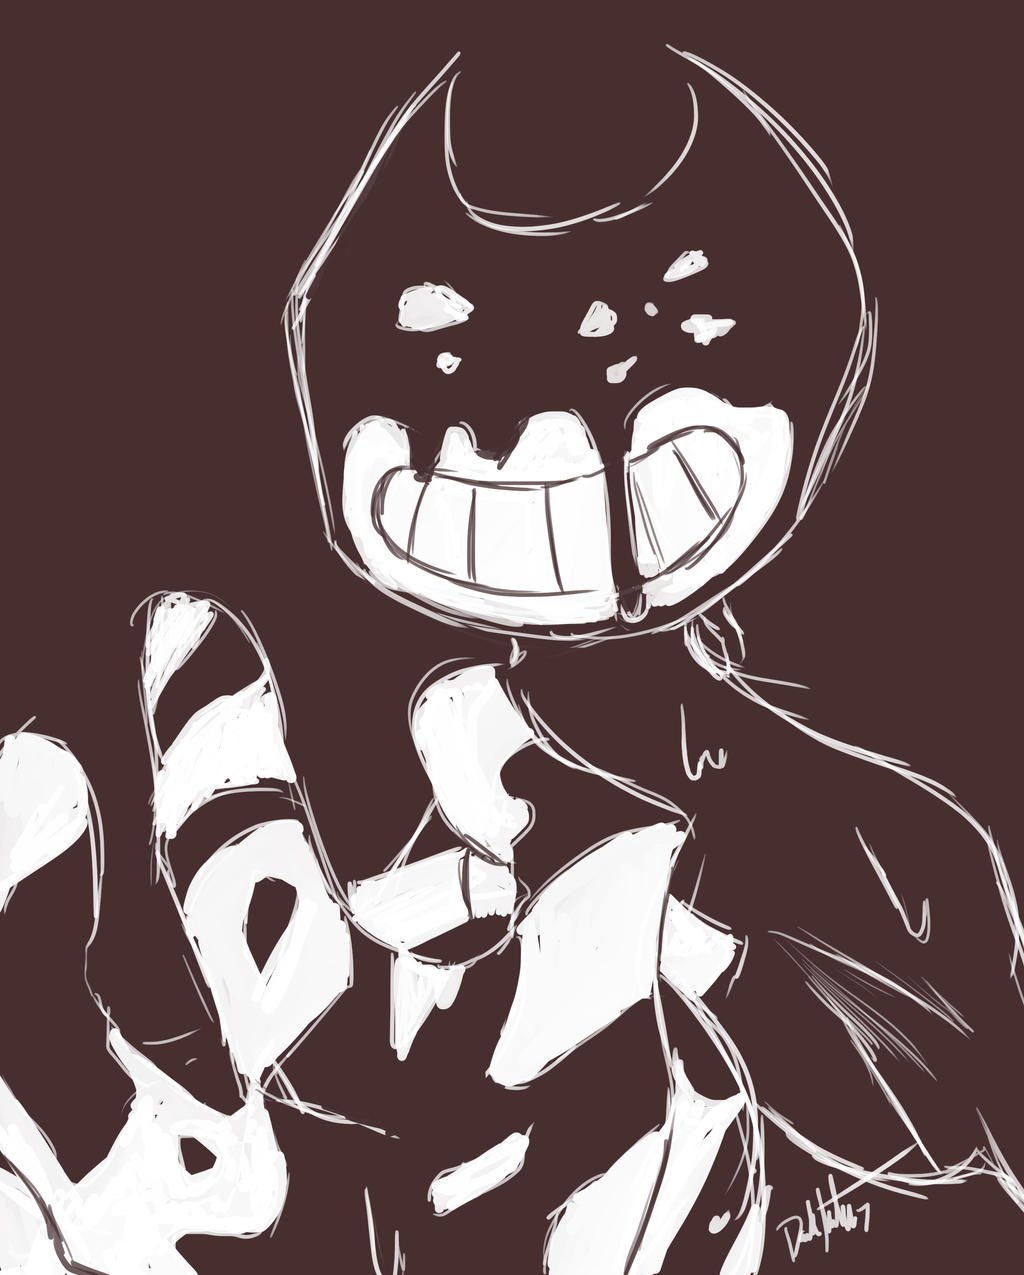 If bendy was in the cuphead show by MerioTheCartoony on DeviantArt